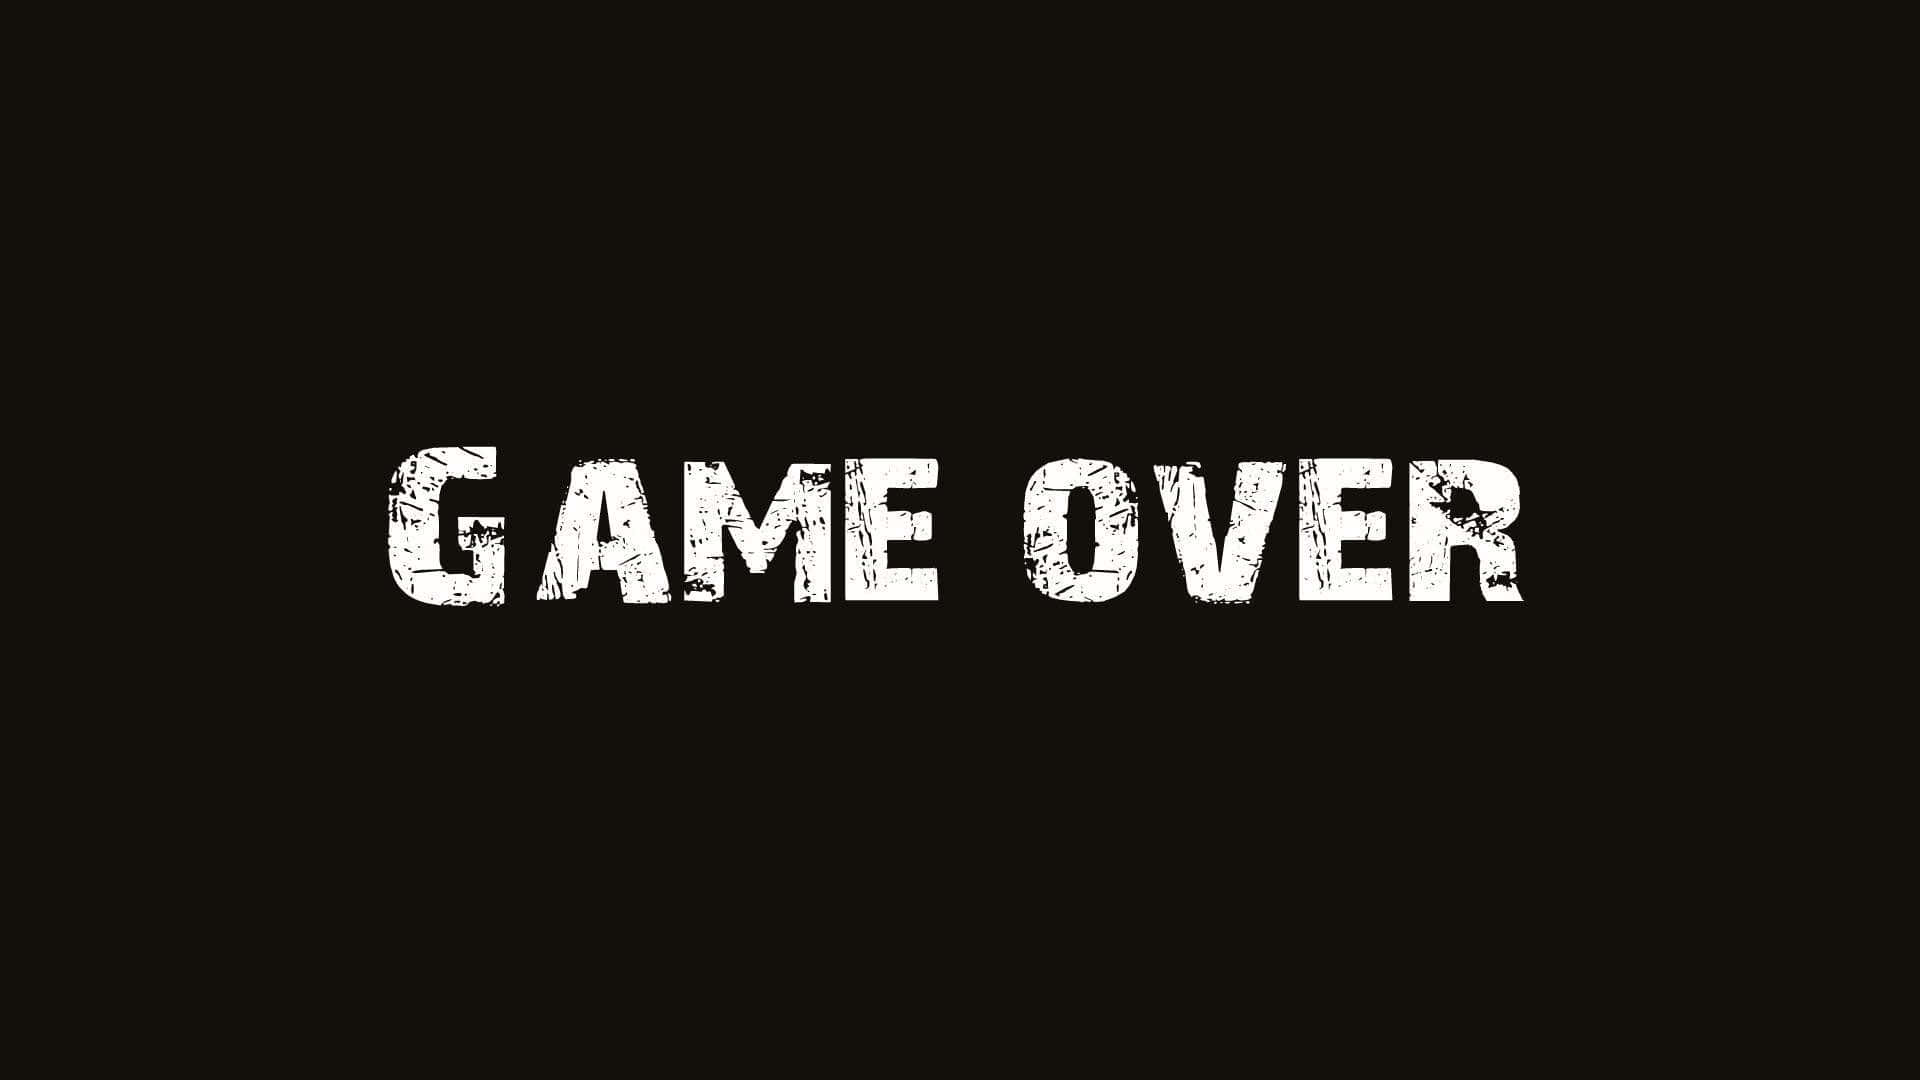 Dark Game Over - The Ultimate End of the Virtual Journey Wallpaper